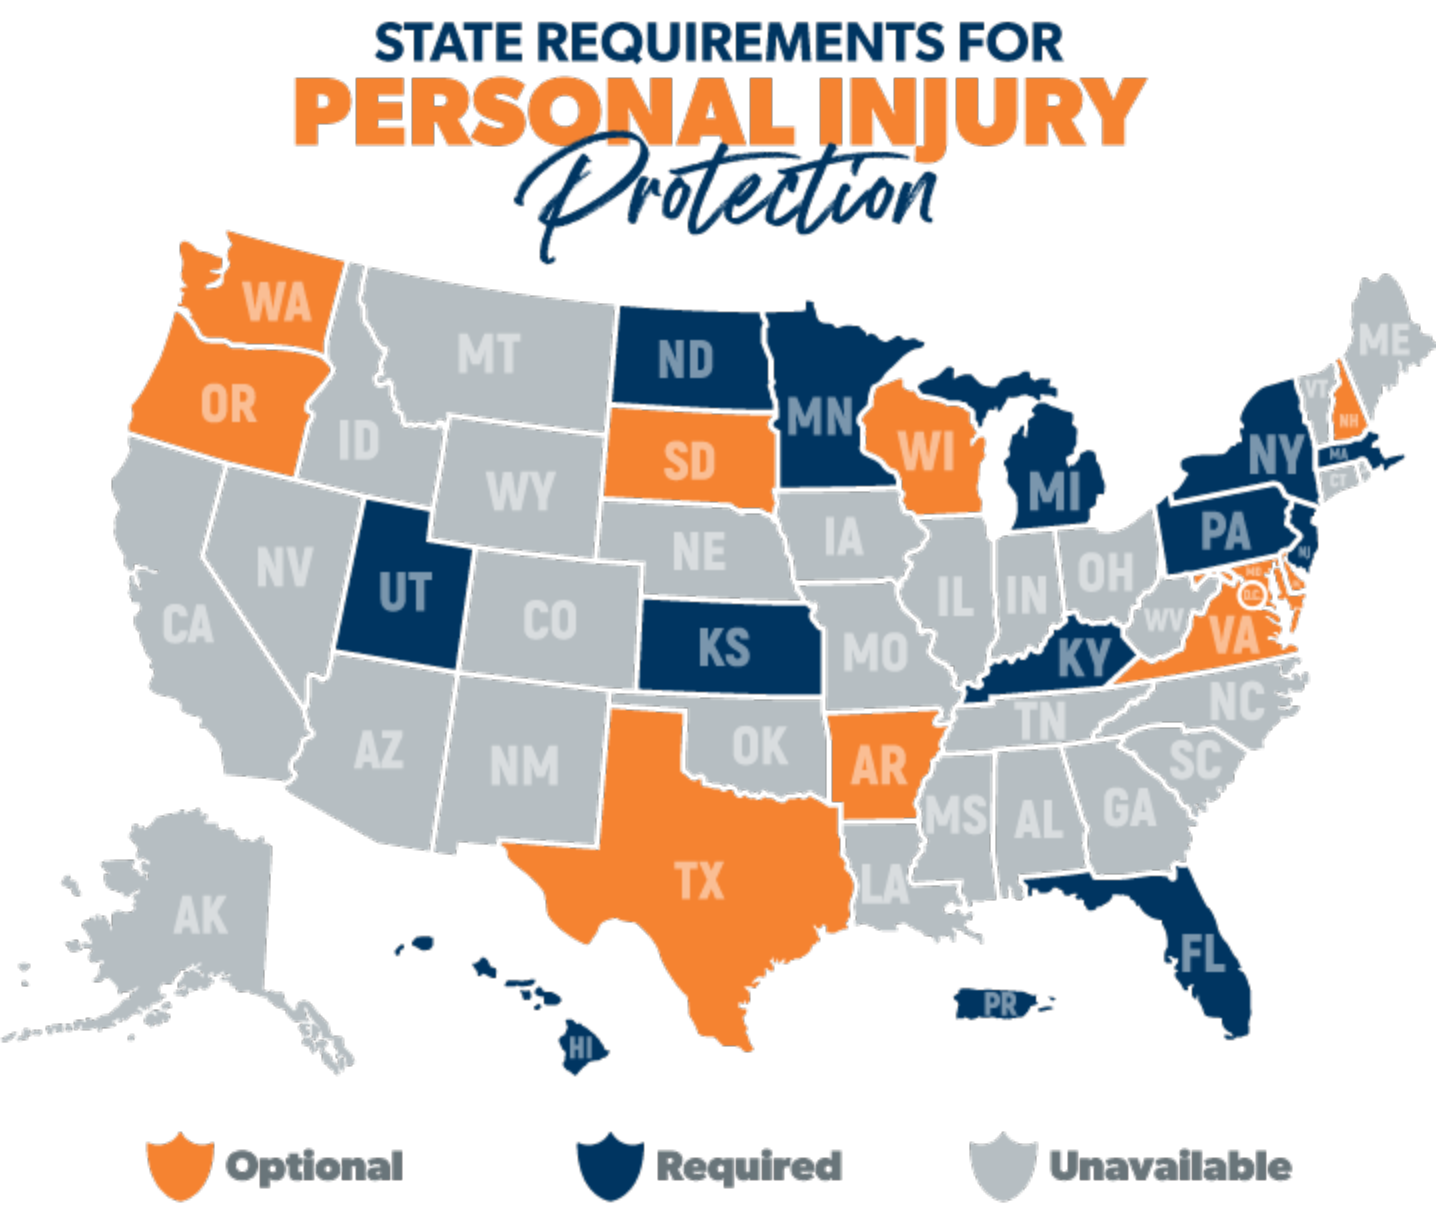 State Requirements for Personal Injury Protection infographic